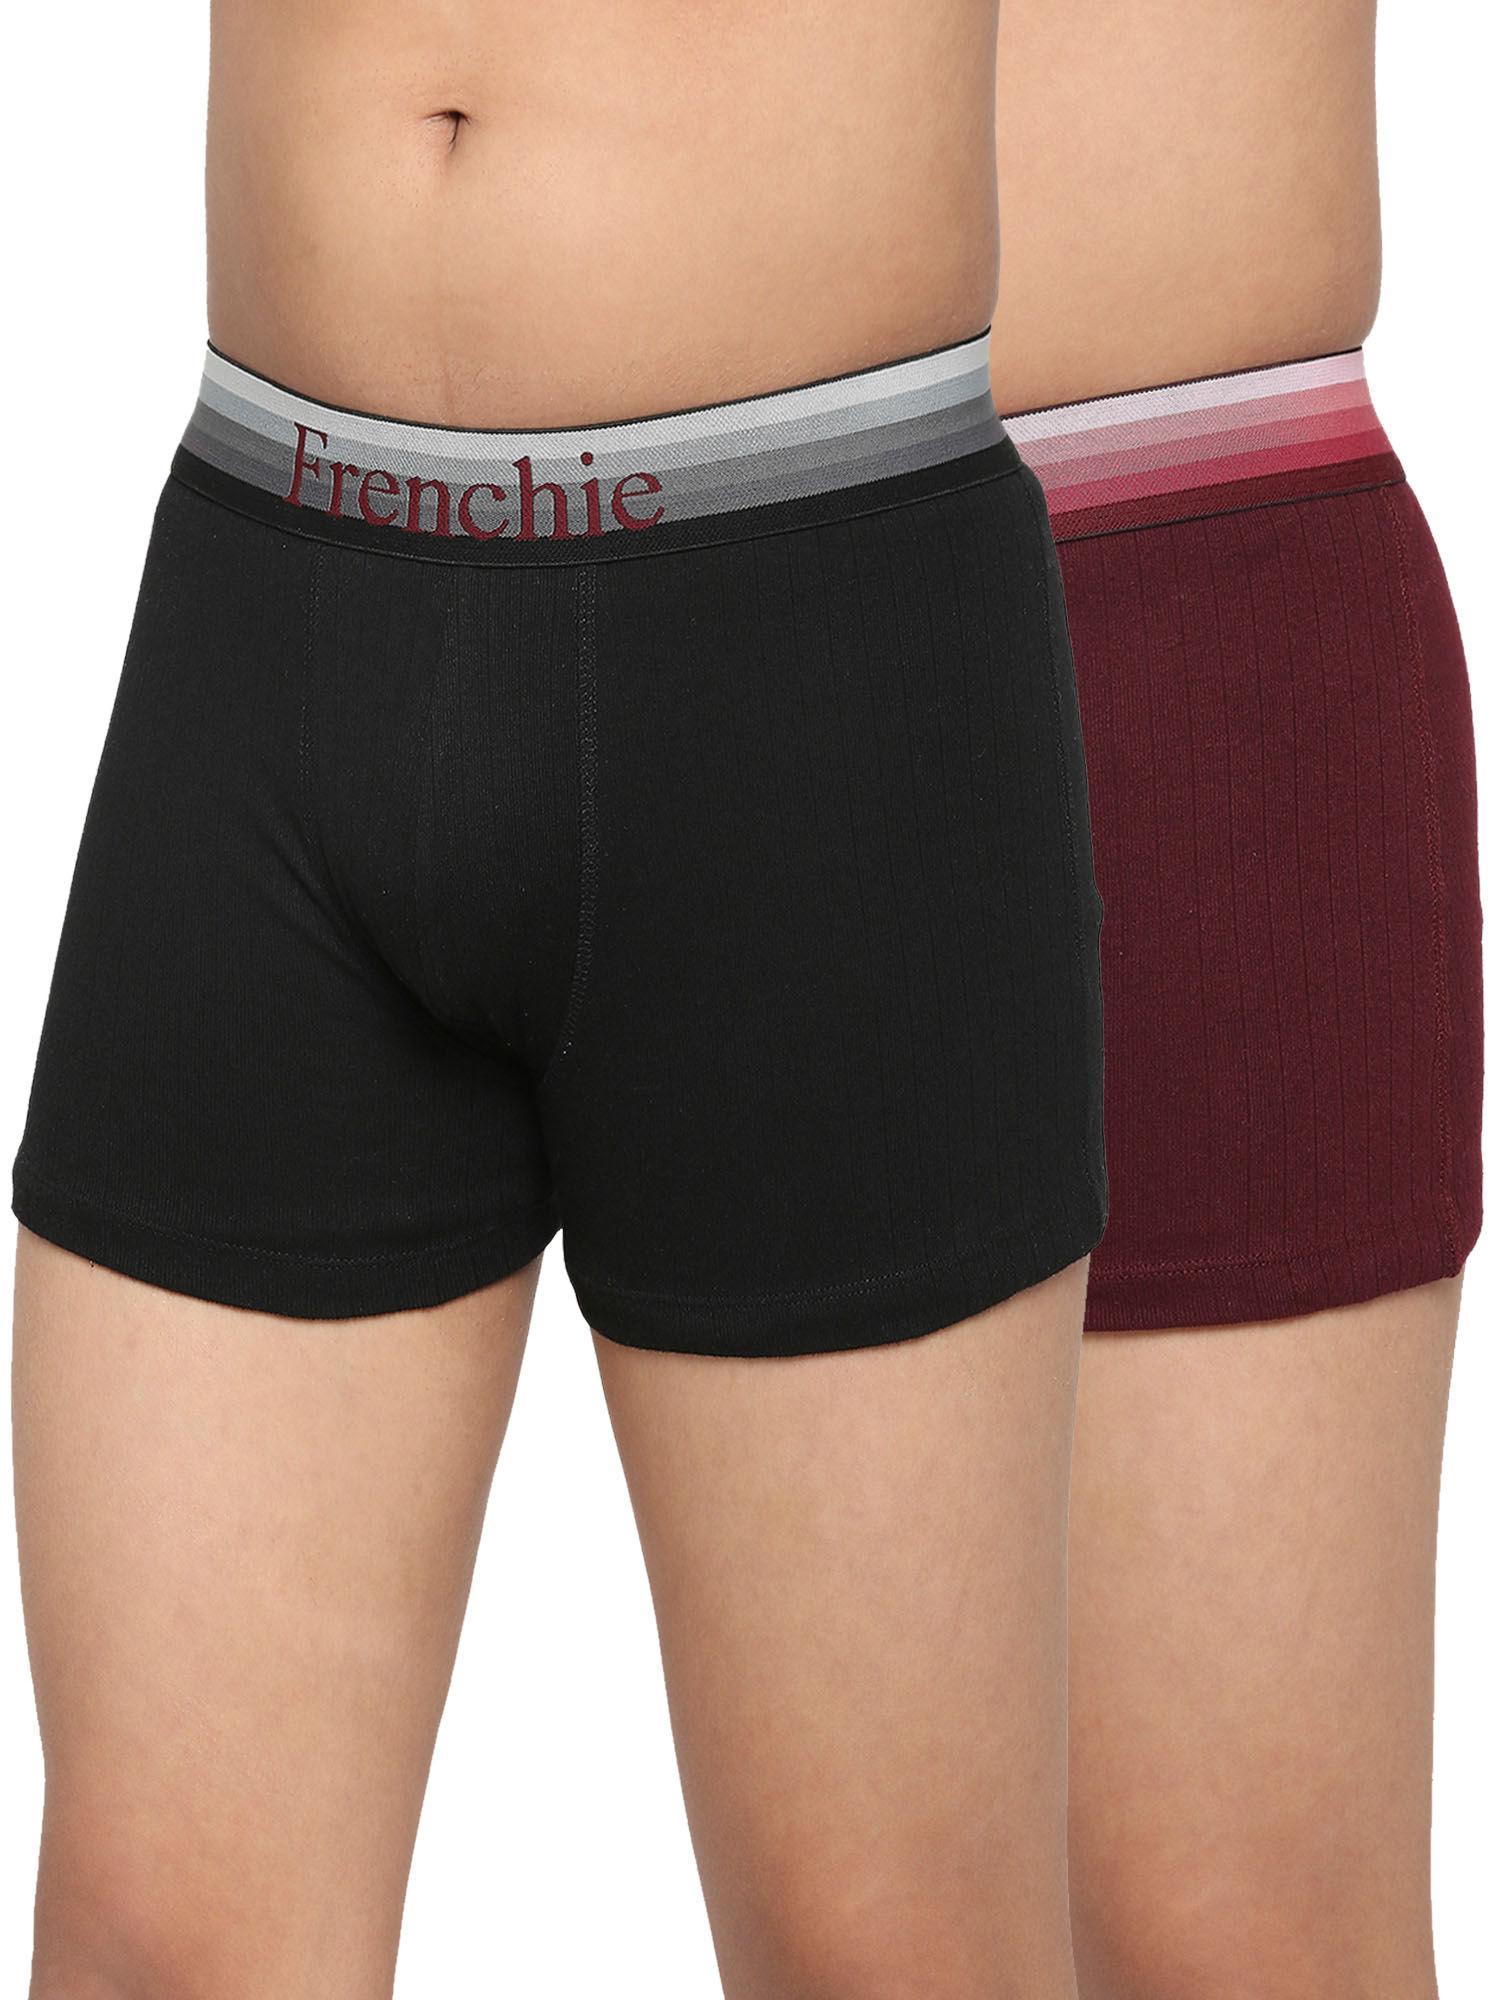 teenagers cotton trunk black and wine (pack of 2)